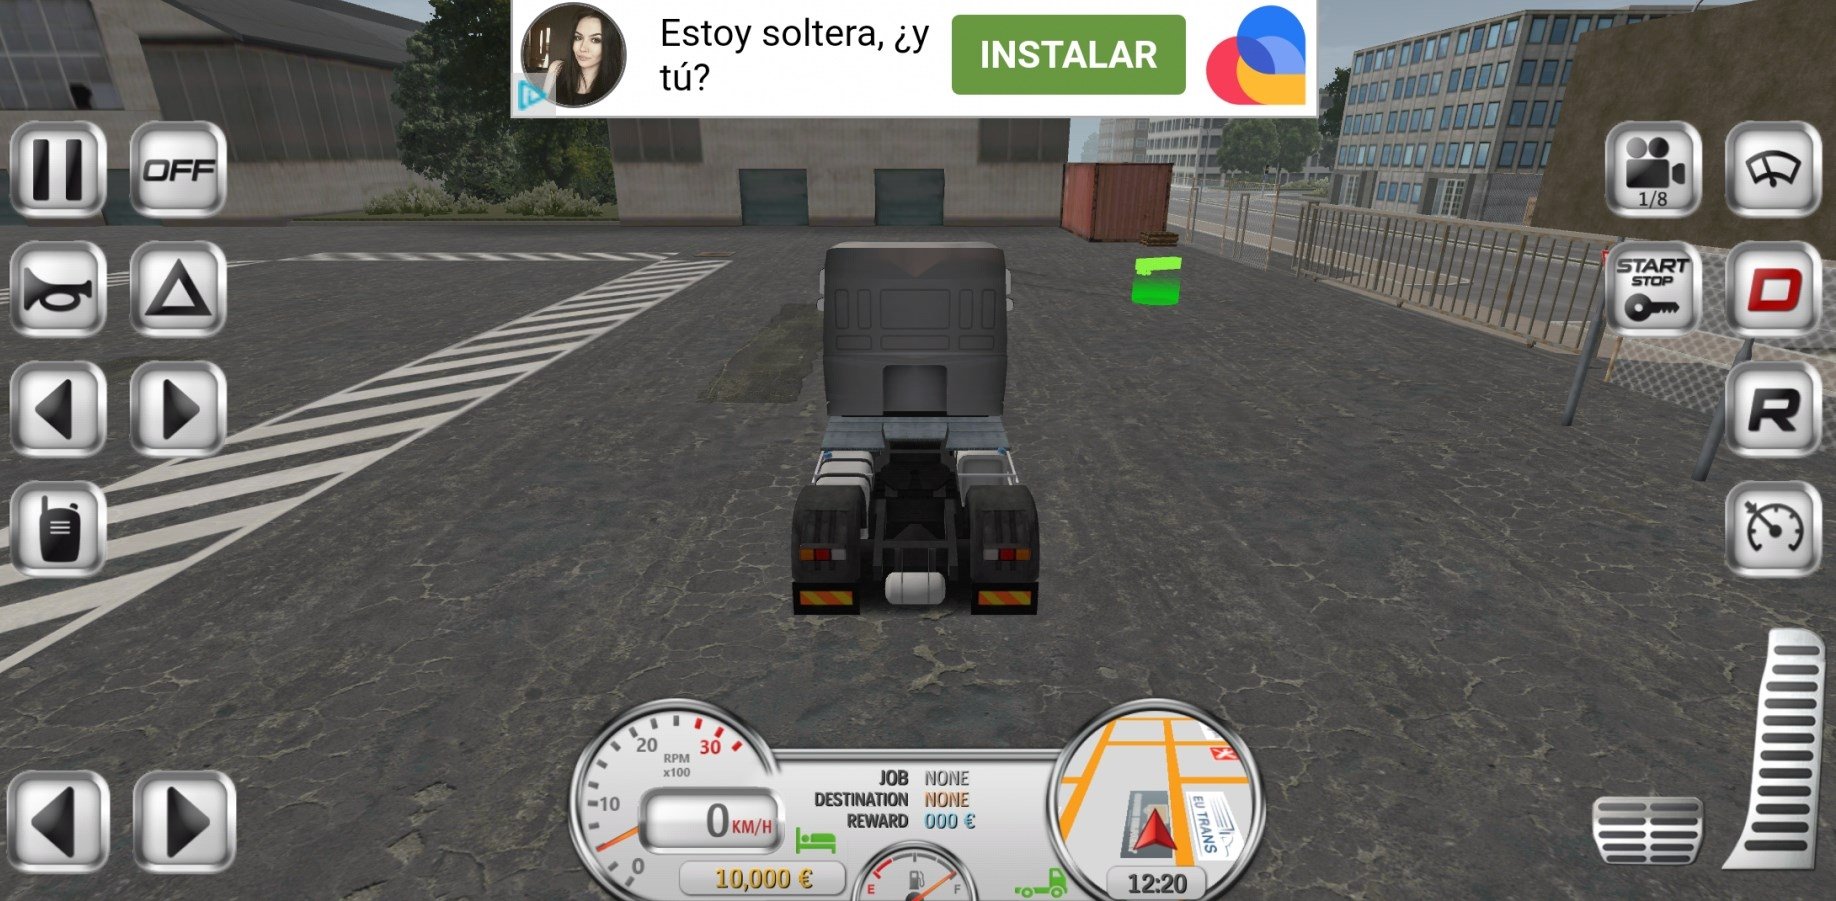 download free euro truck driver